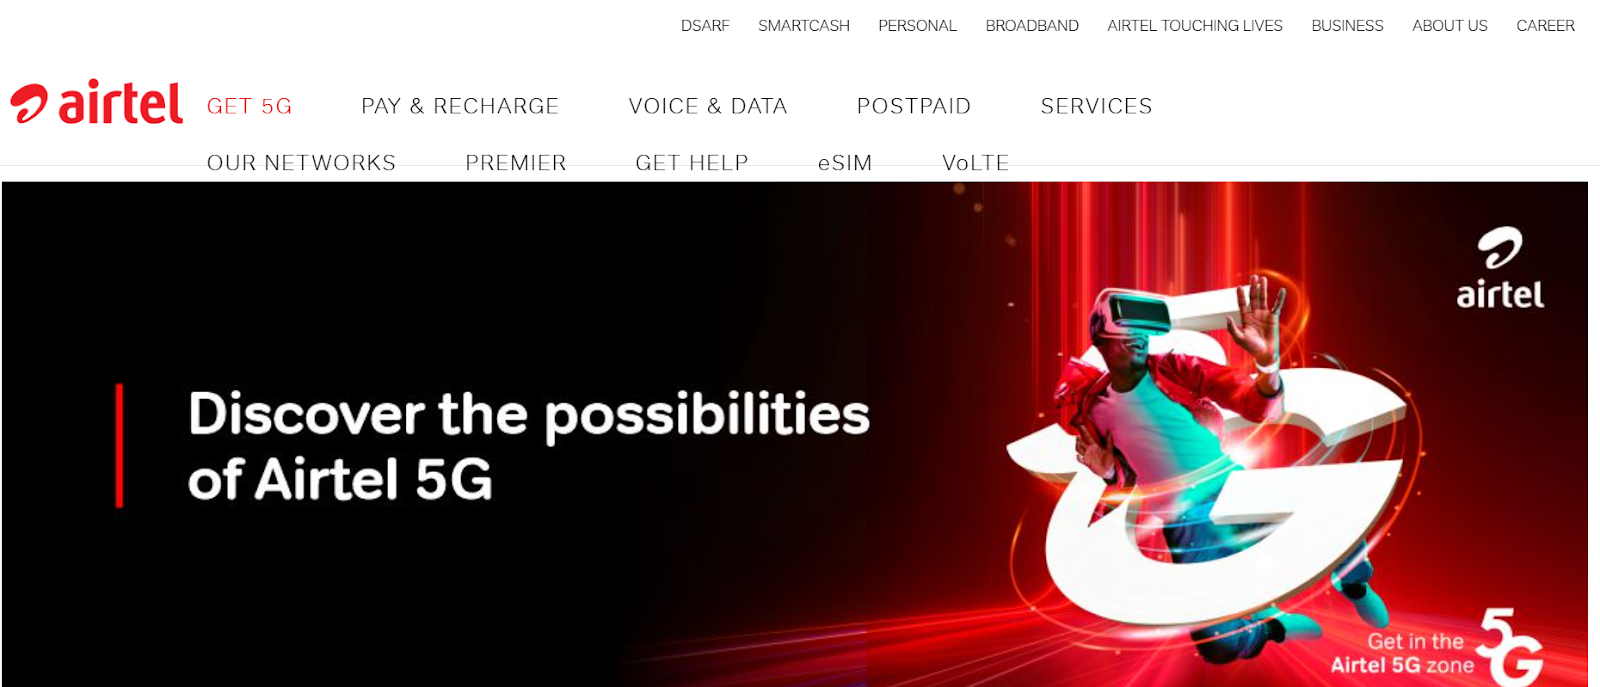 Airtel Nigeria website snapshot highlighting the services it offers.